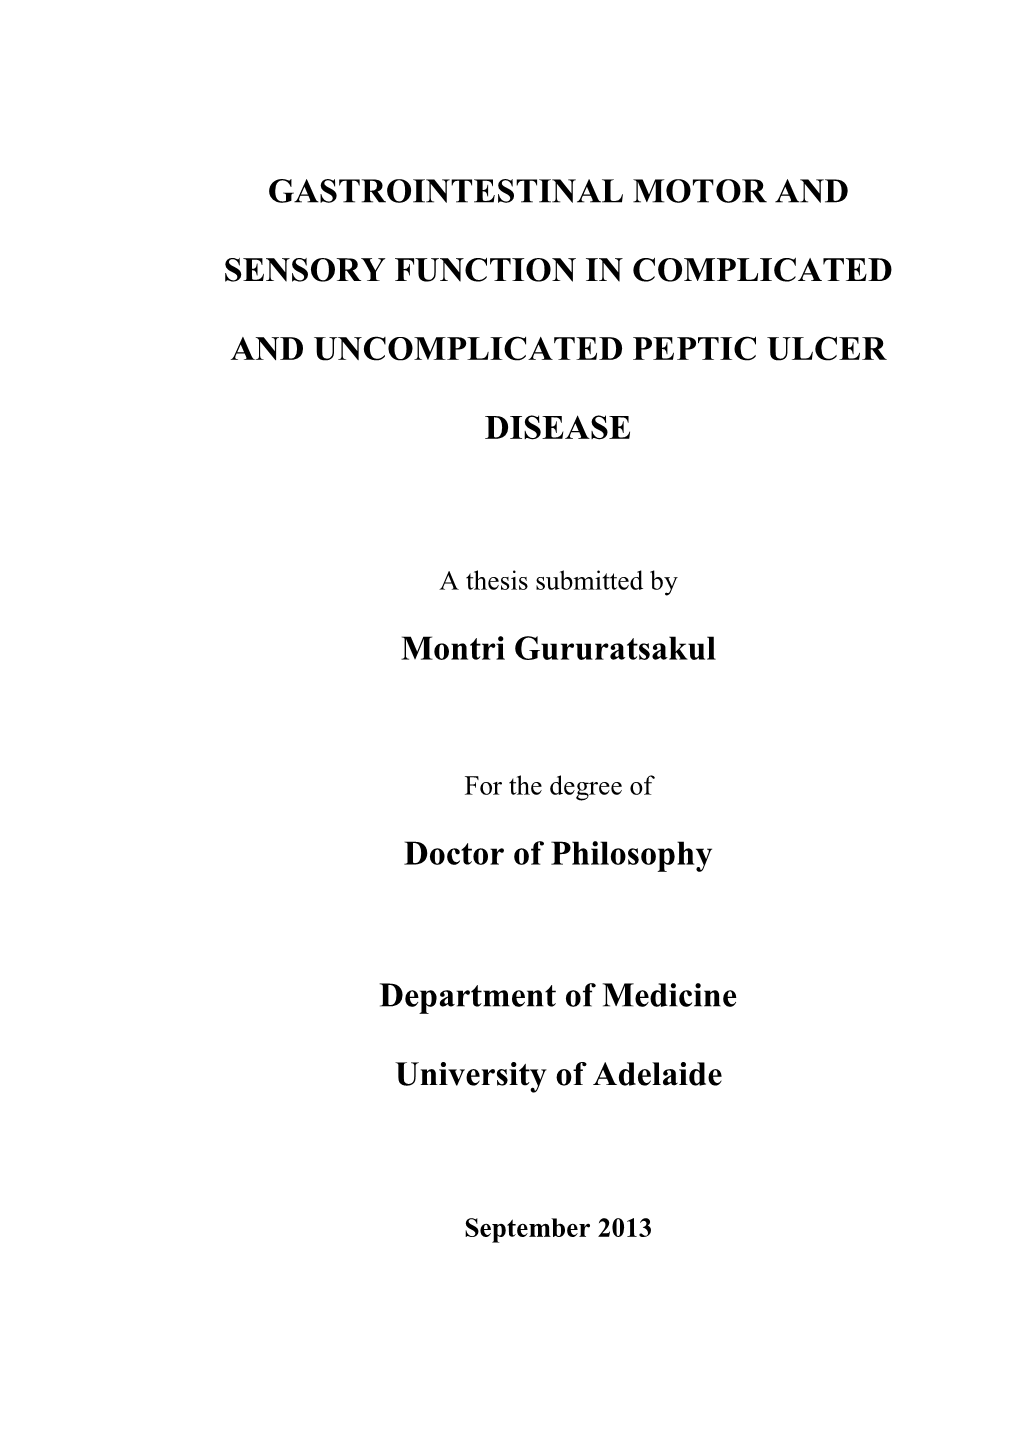 Gastrointestinal Motor and Sensory Function in Complicated And